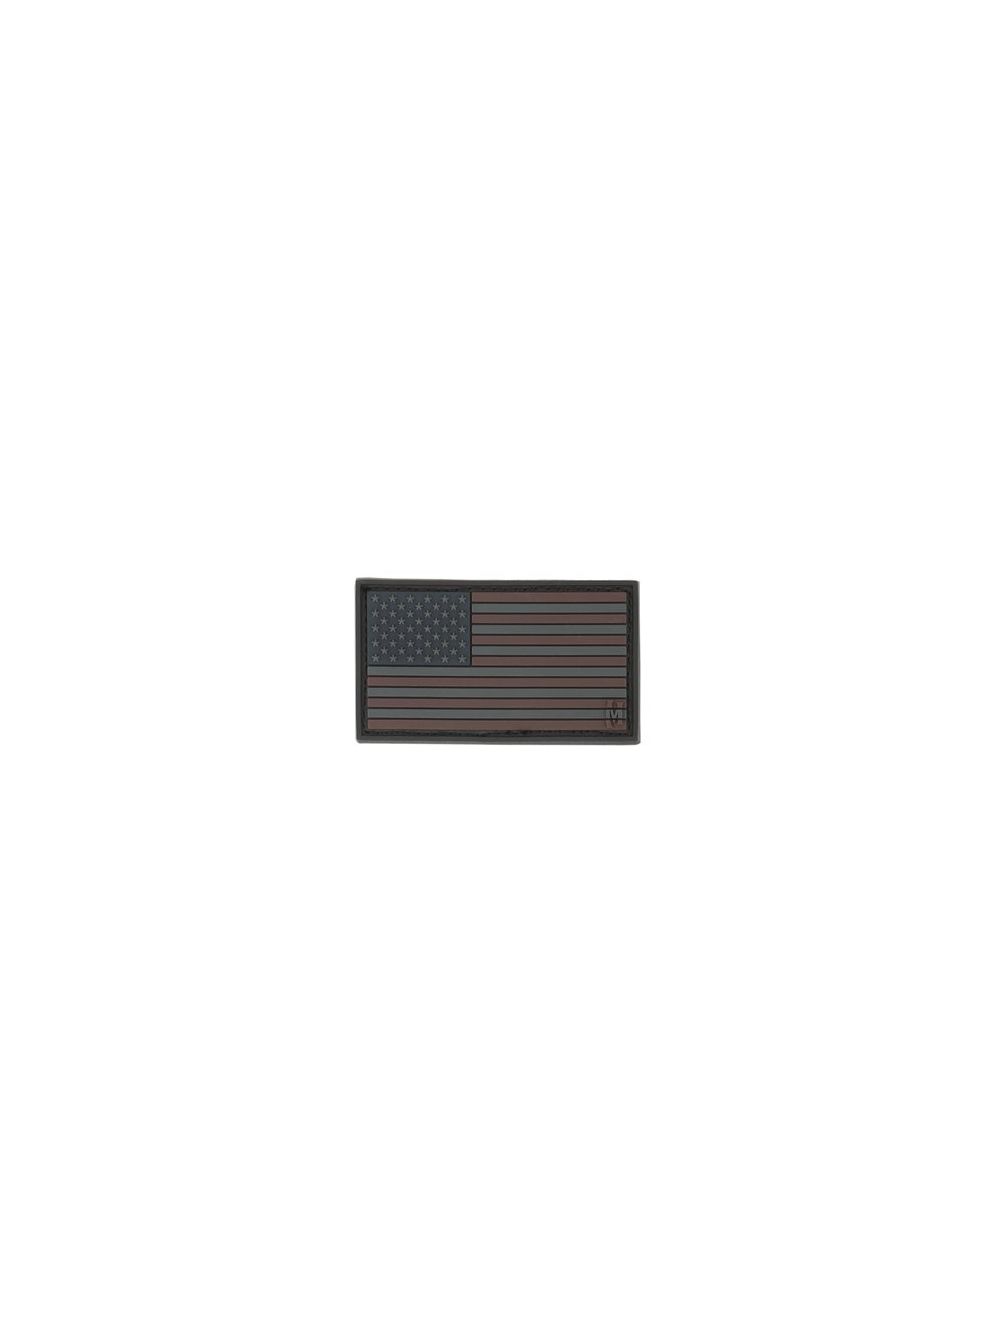 USA Flag Morale Patch (Small)